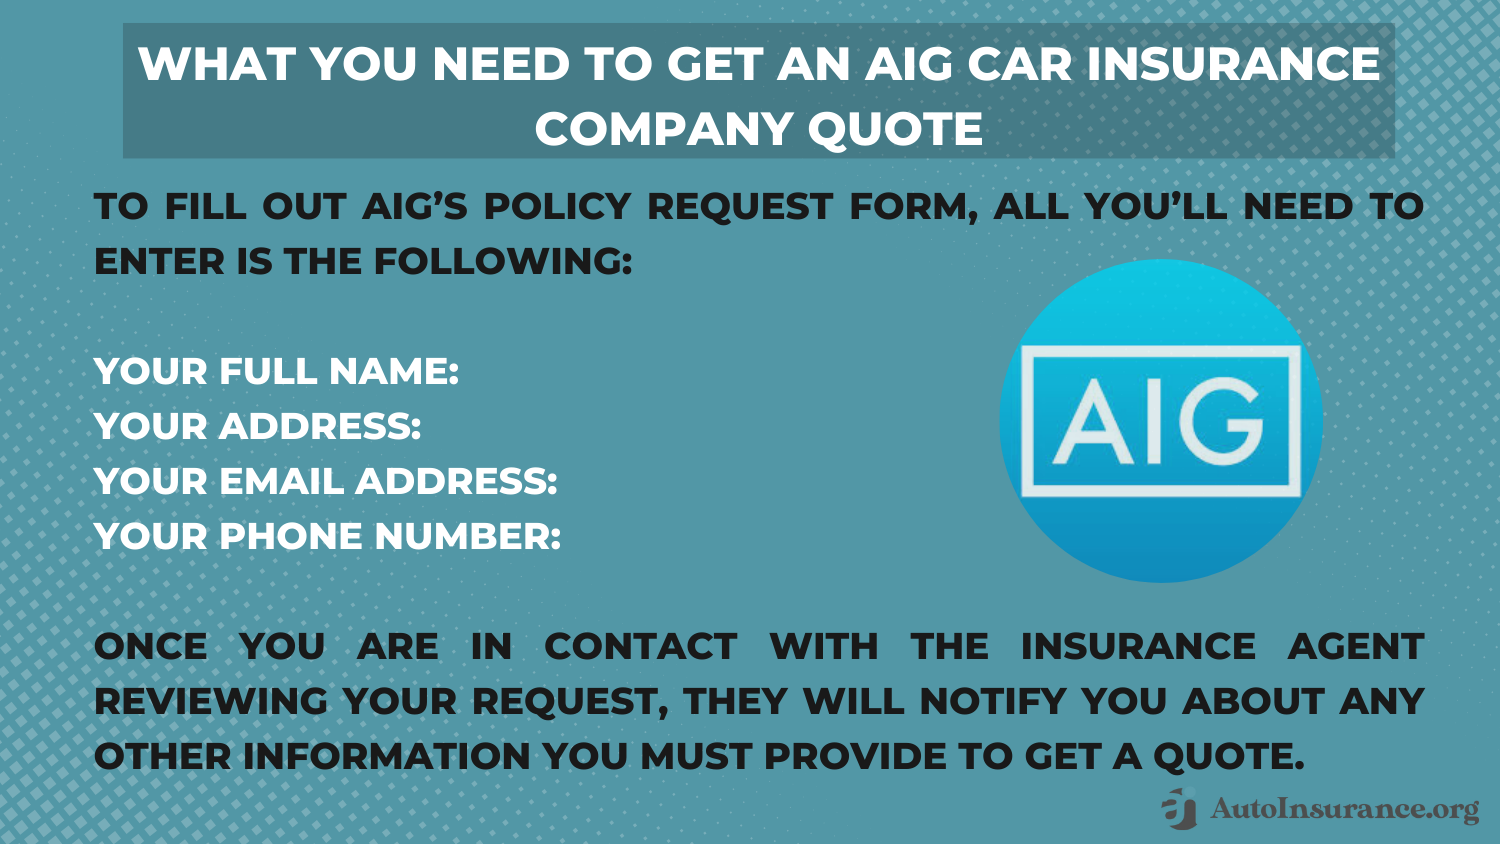 AIG Auto Insurance: What You Need to Get an AIG Car Insurance Company Quote